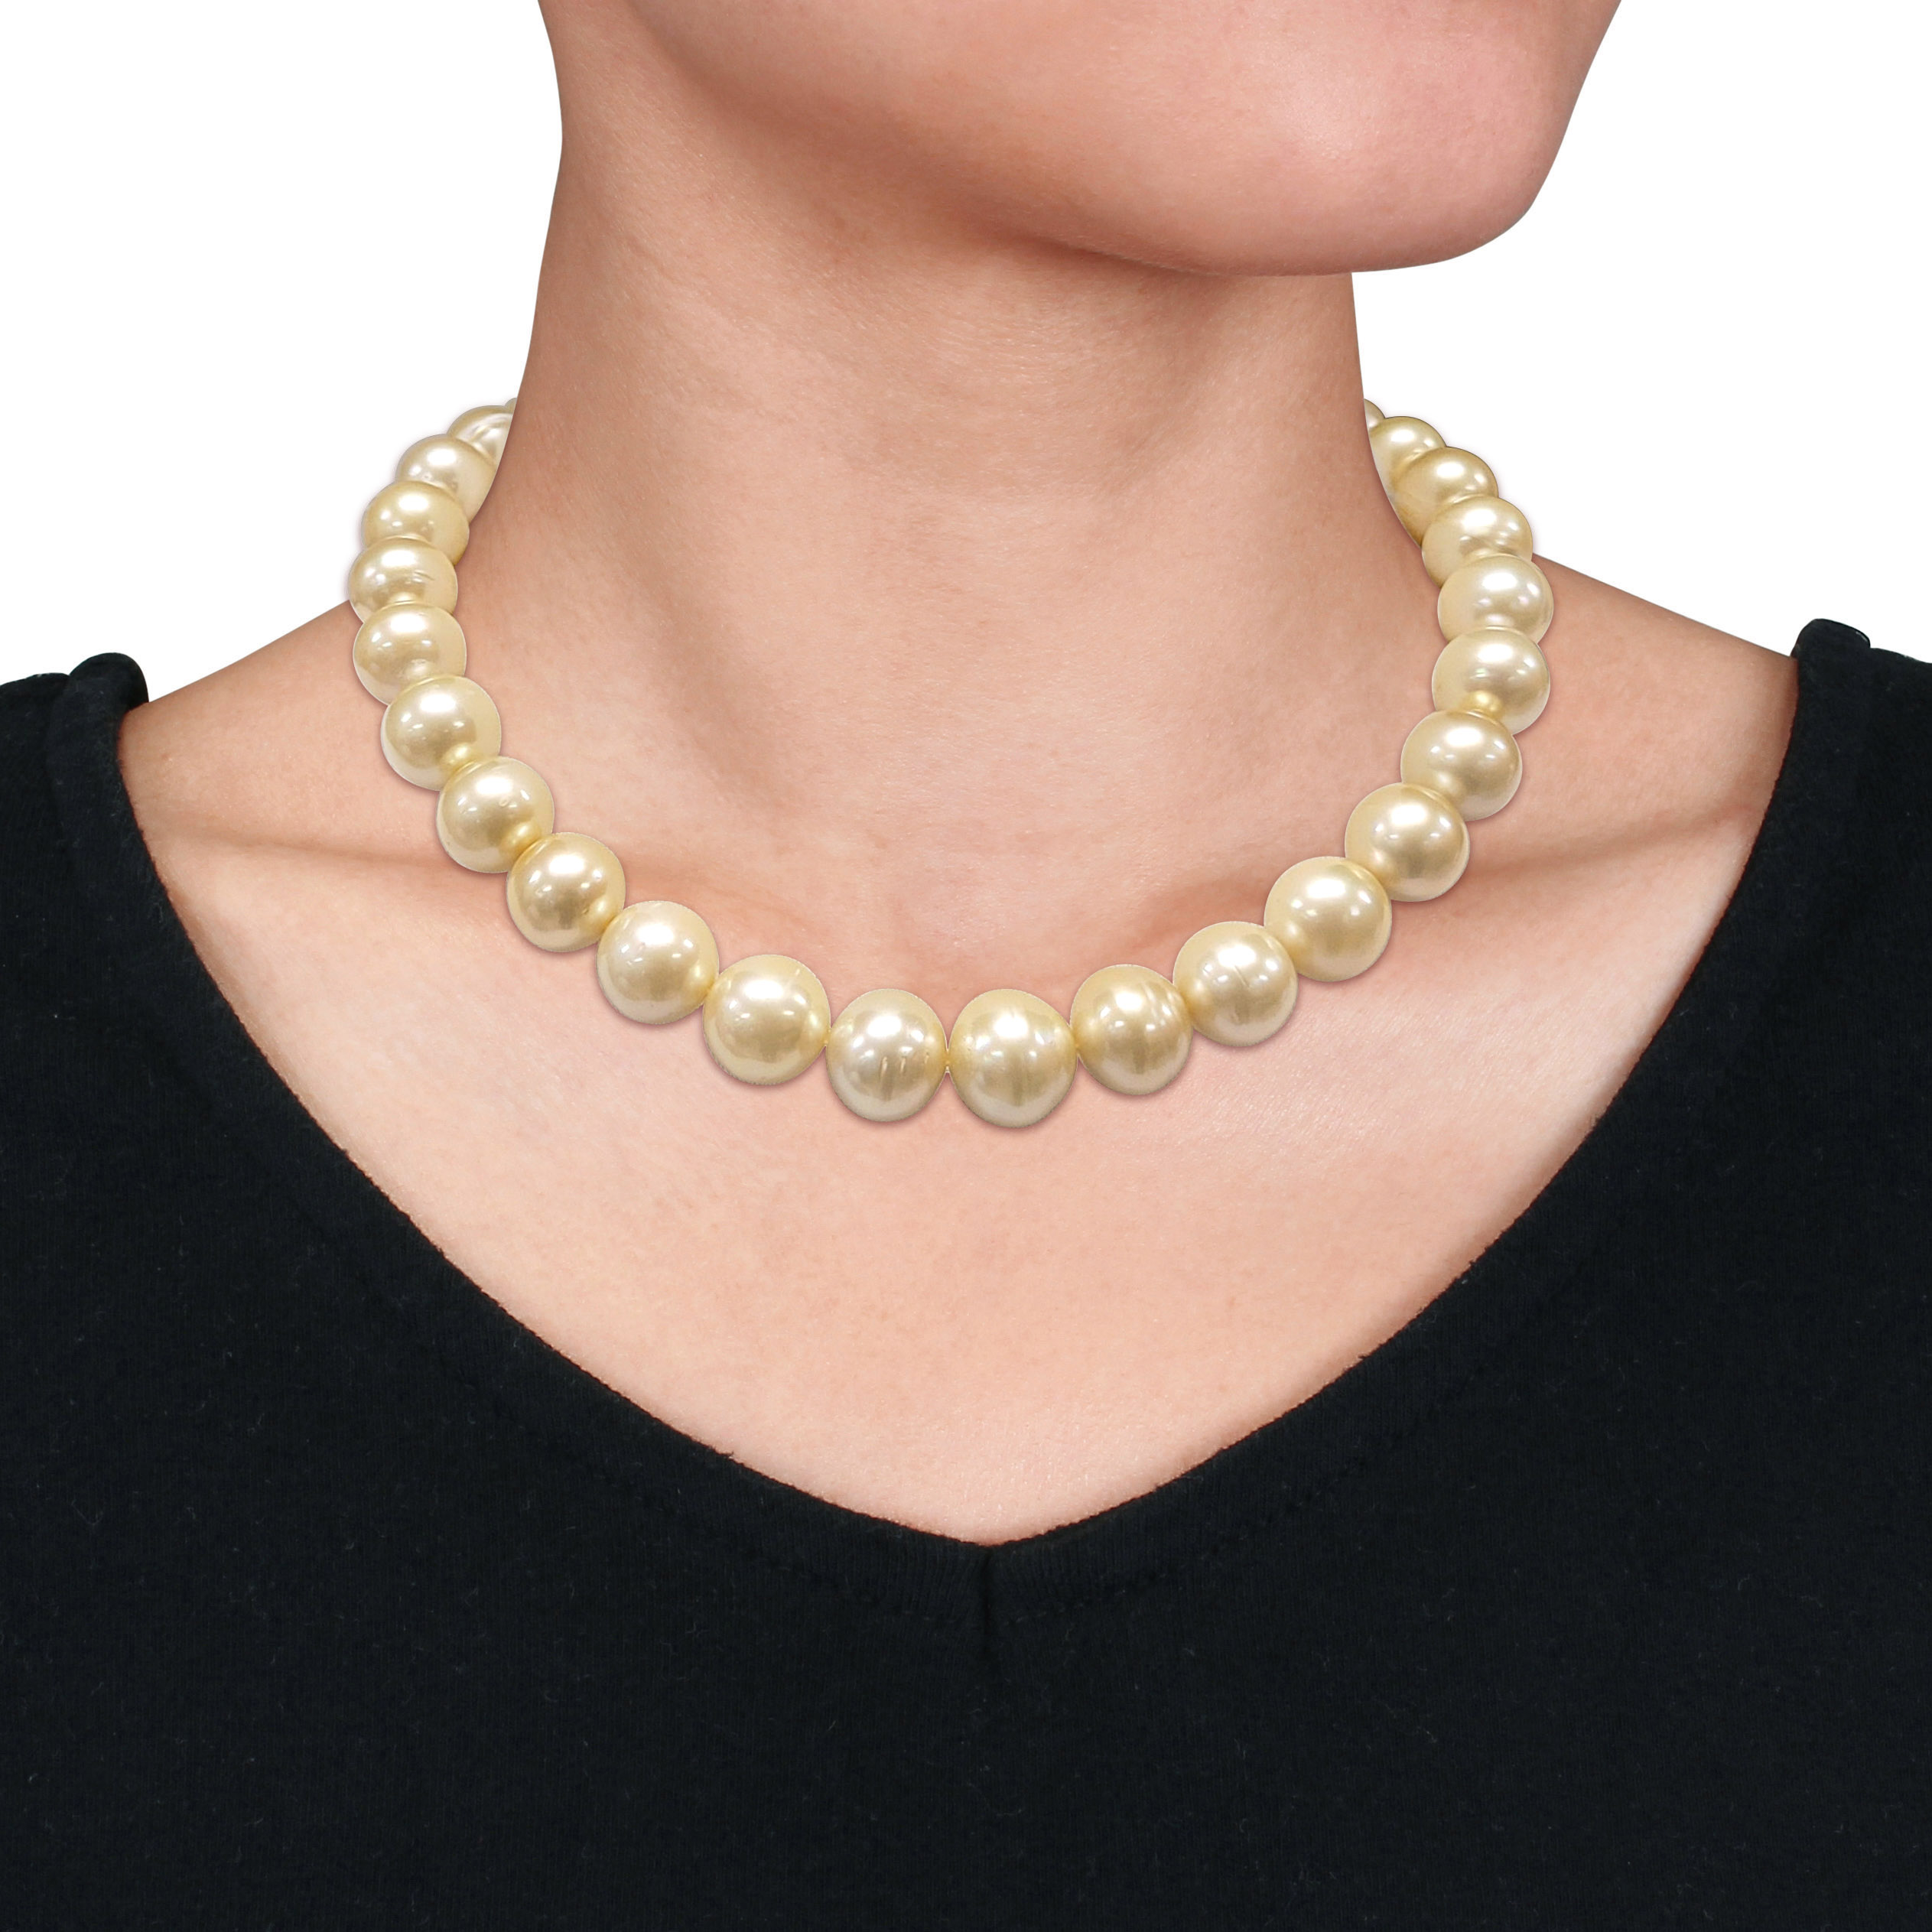 13-15 MM Golden South Sea Cultured Pearl Graduated Necklace in 14k Yellow Gold - 18 in